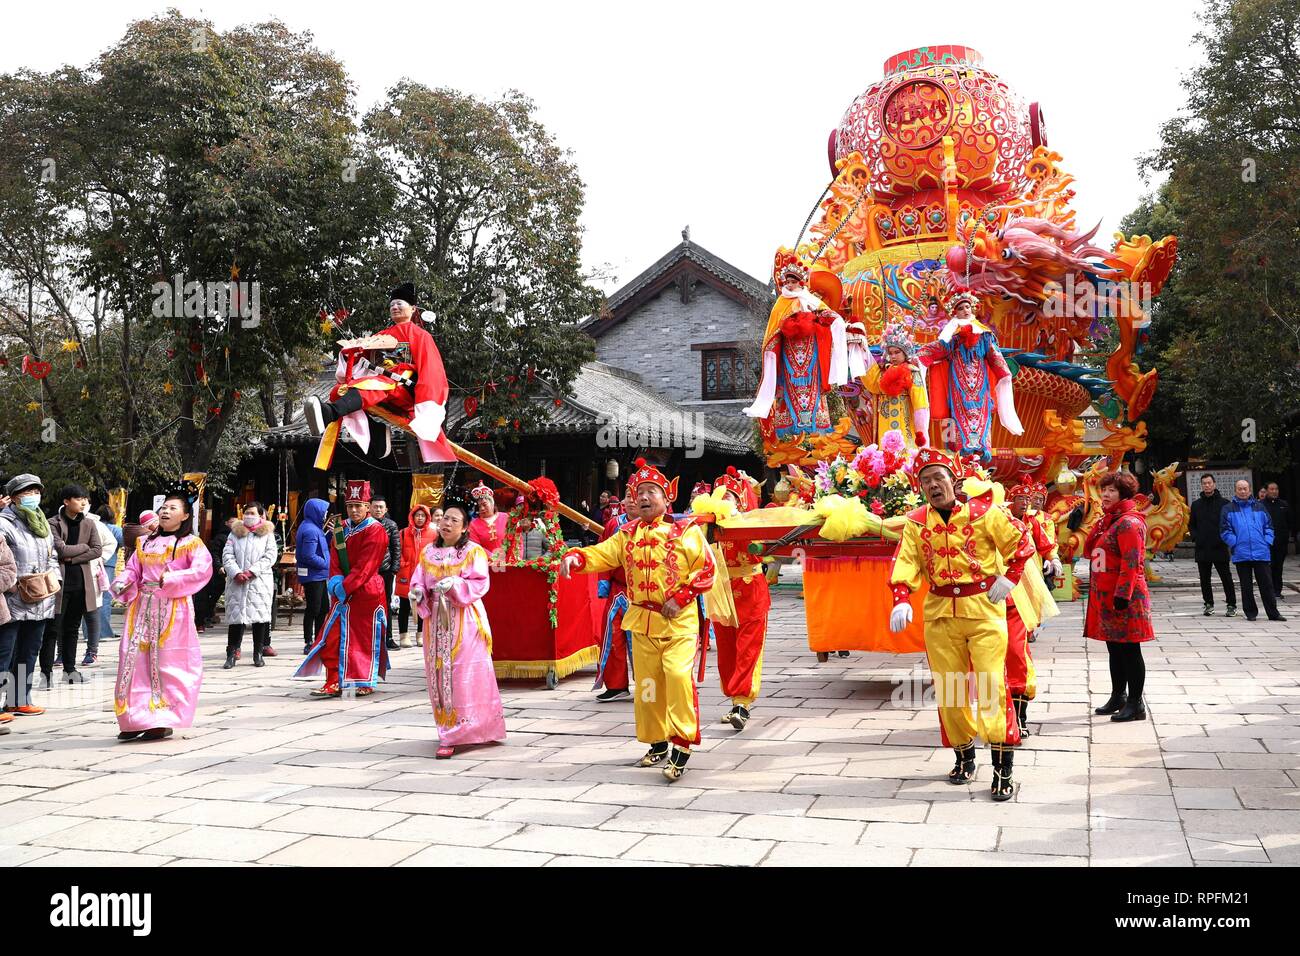 Zaozhuan, Zaozhuan, China. 22nd Feb, 2019. Zaozhuang, CHINA-Tourists enjoy the traditional performance during Spring Festival in TaiÃ¢â‚¬â„¢erzhuang, Zaozhuang, east ChinaÃ¢â‚¬â„¢s Shandong Province. The performers standing on the stilts attrat many peopleÃ¢â‚¬â„¢s attention. Credit: SIPA Asia/ZUMA Wire/Alamy Live News Stock Photo